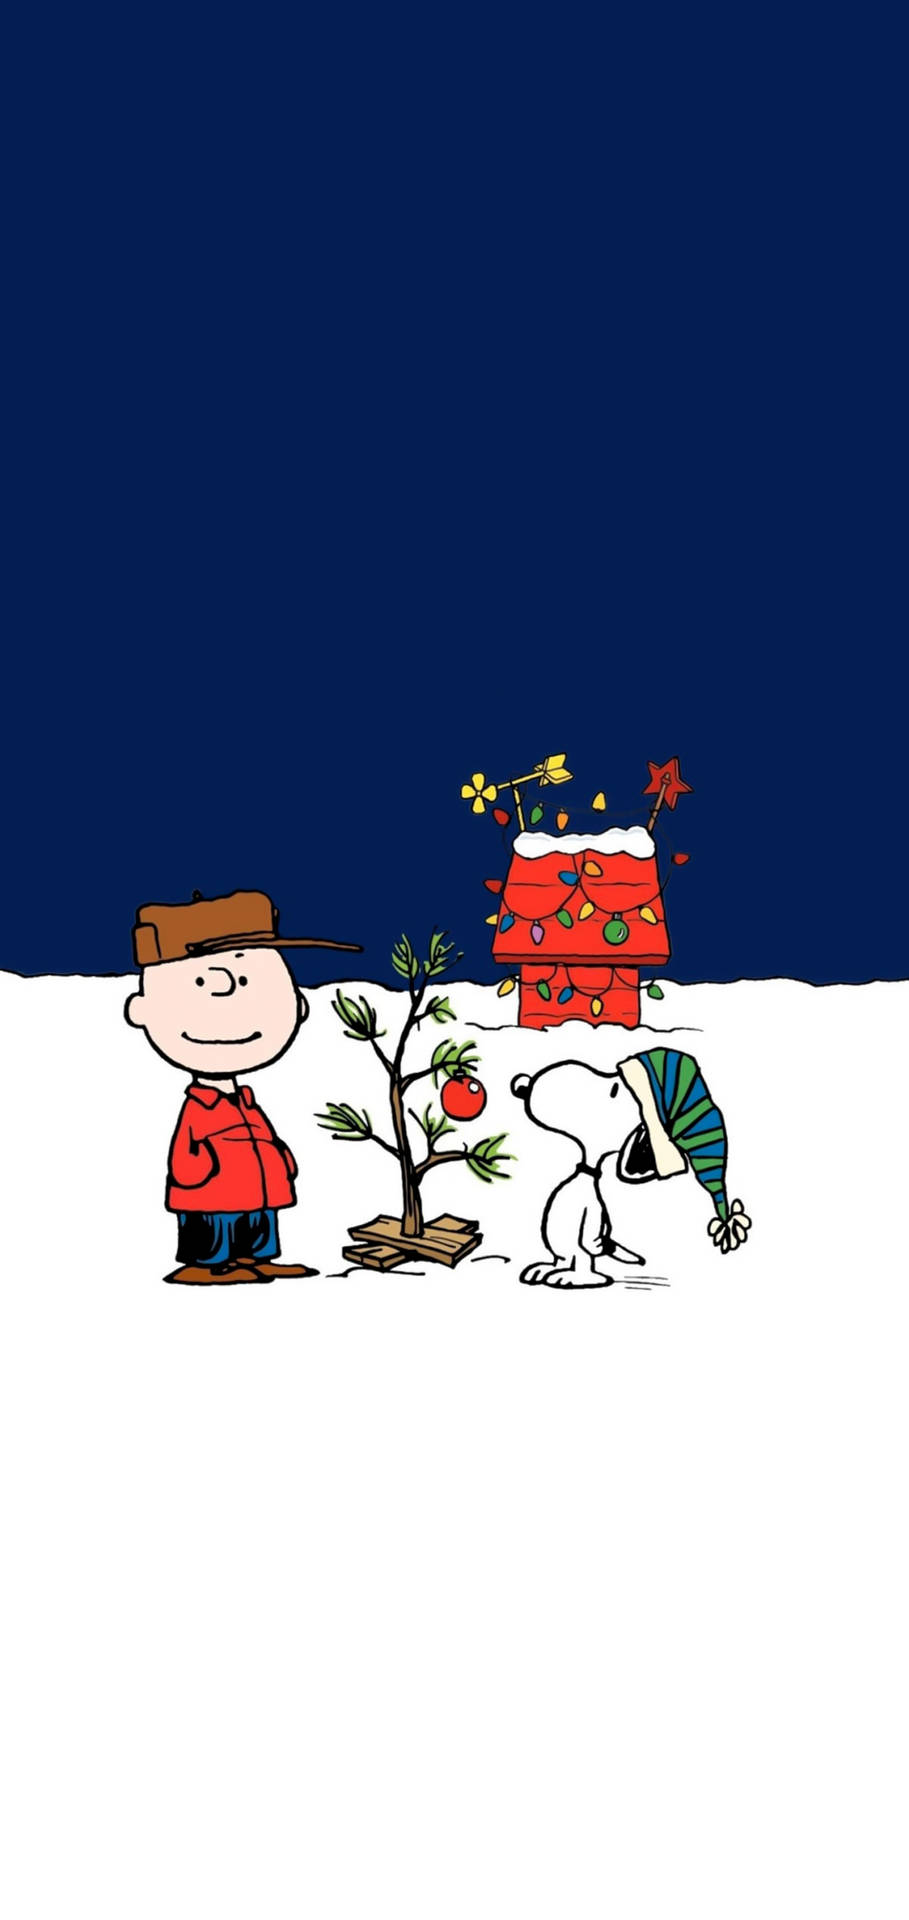 Celebrate the Holiday Season with Snoopy Wallpaper